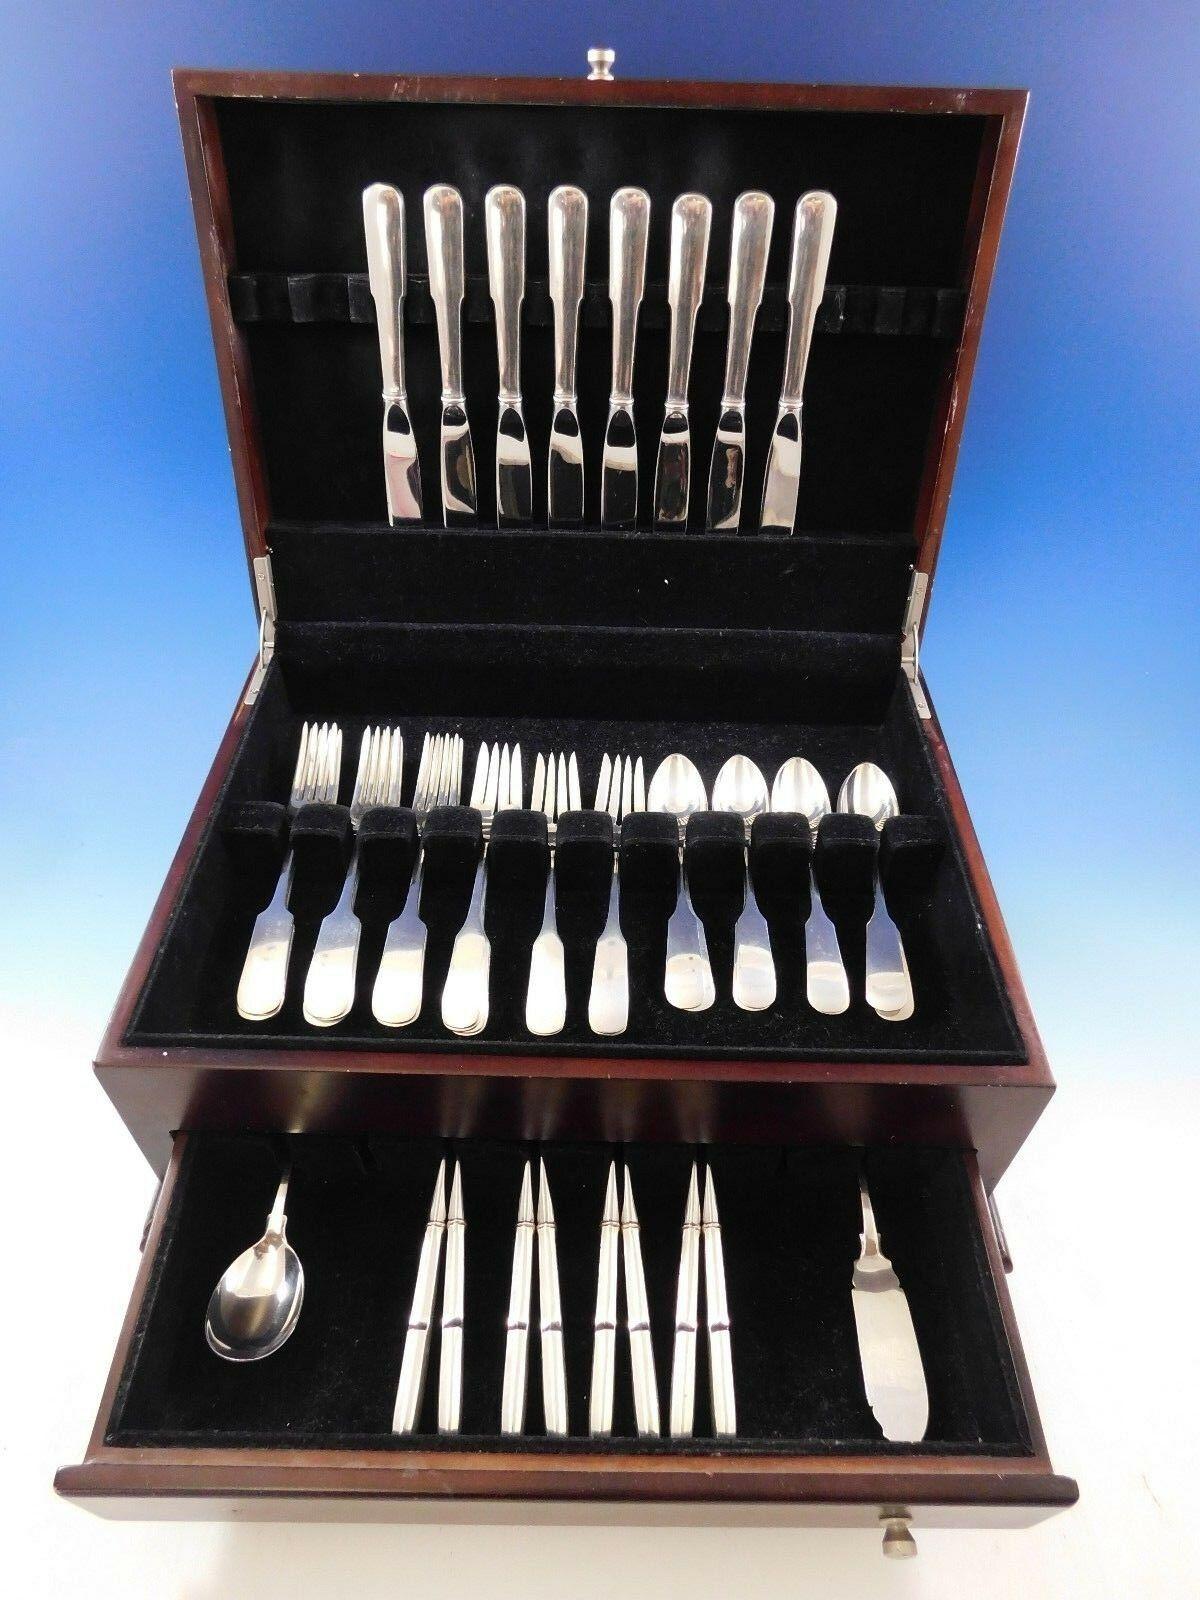 Stunning old English Tipt by Gorham sterling silver flatware set - 42 Pieces. This set includes:

8 knives, 8 3/4